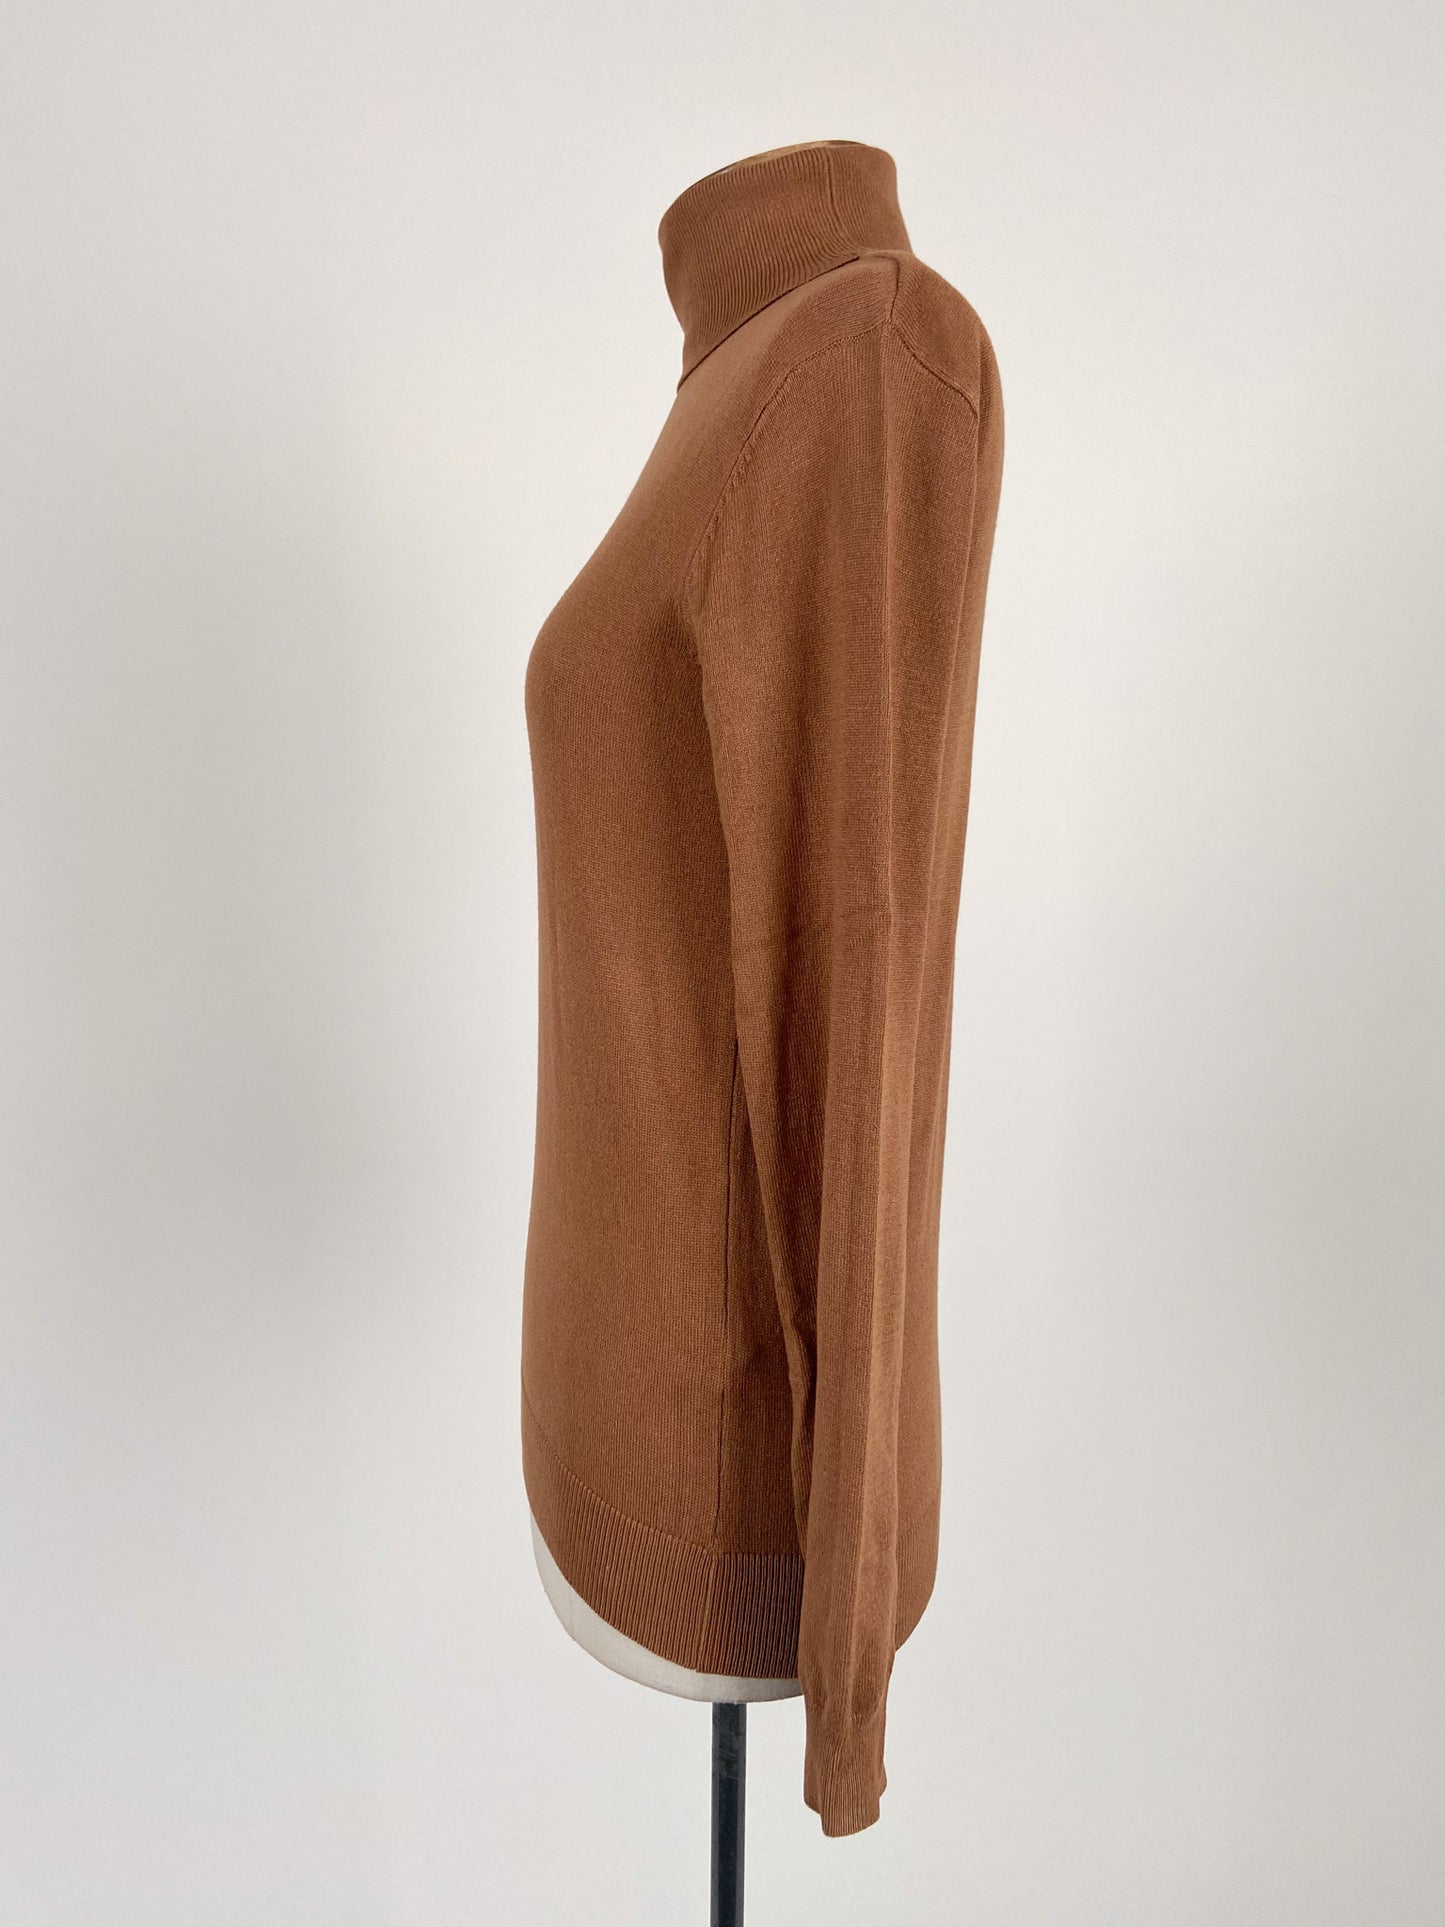 H&M | Brown Casual/Workwear Jumper | Size XS